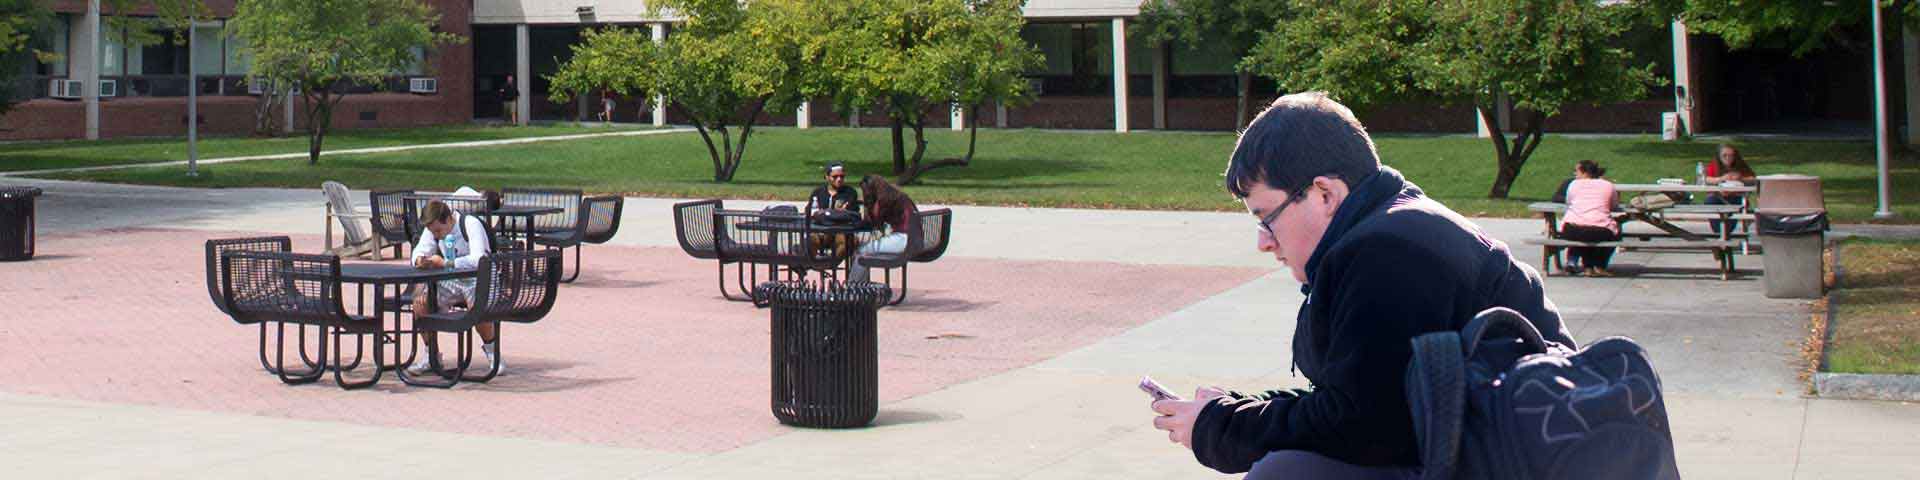 An NECC current student using Navigate on his phone outside.